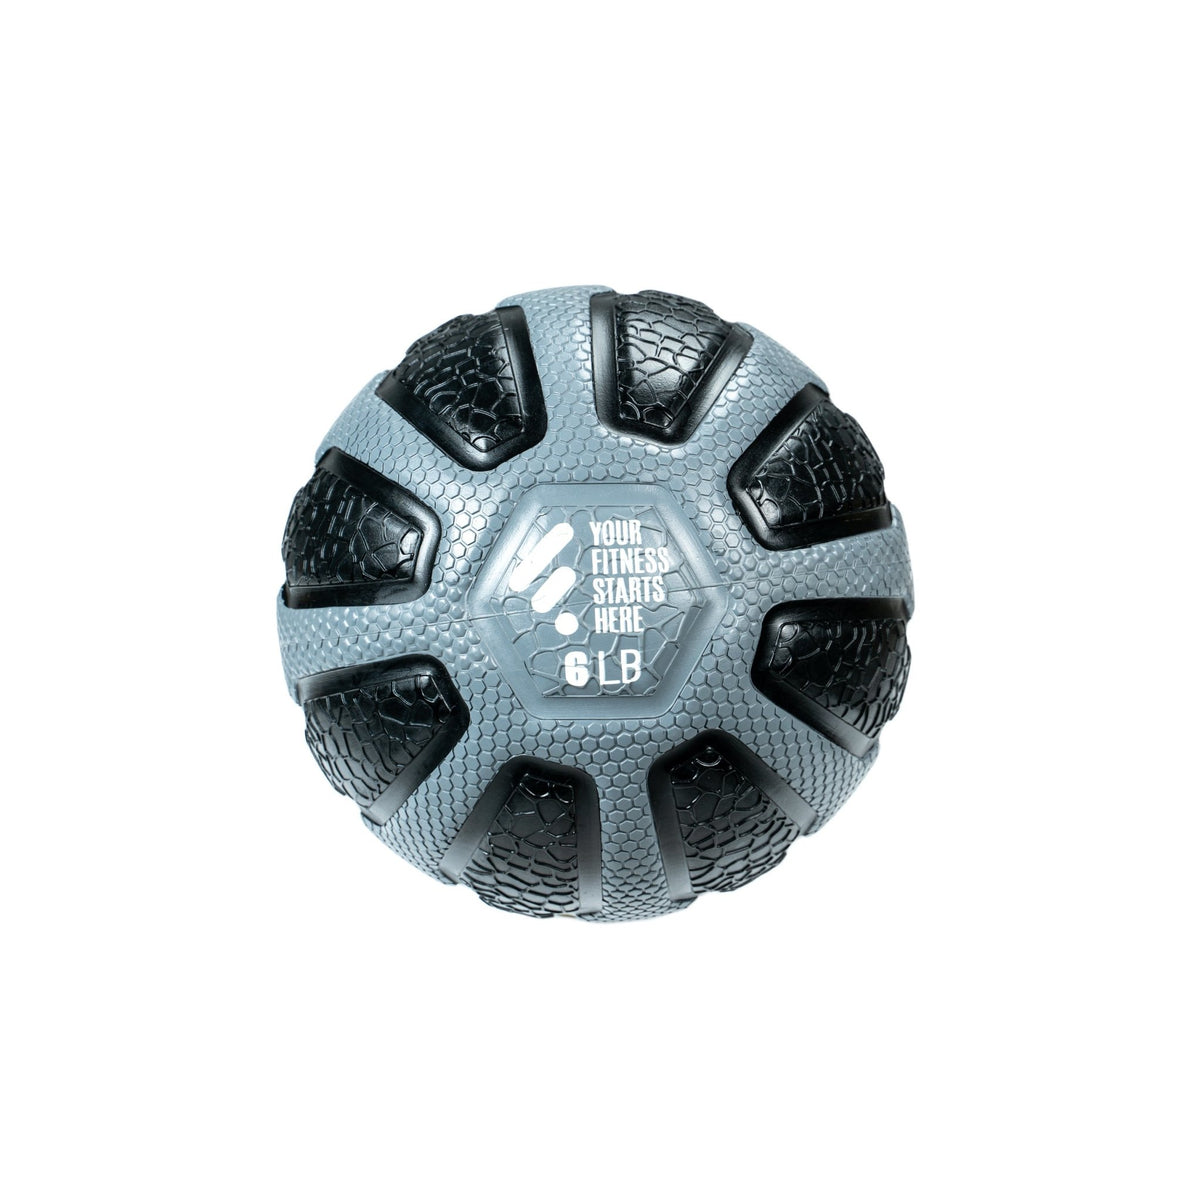 FitWay Equip. Max Grip Medicine Ball - 6 Lbs - Fitness Experience